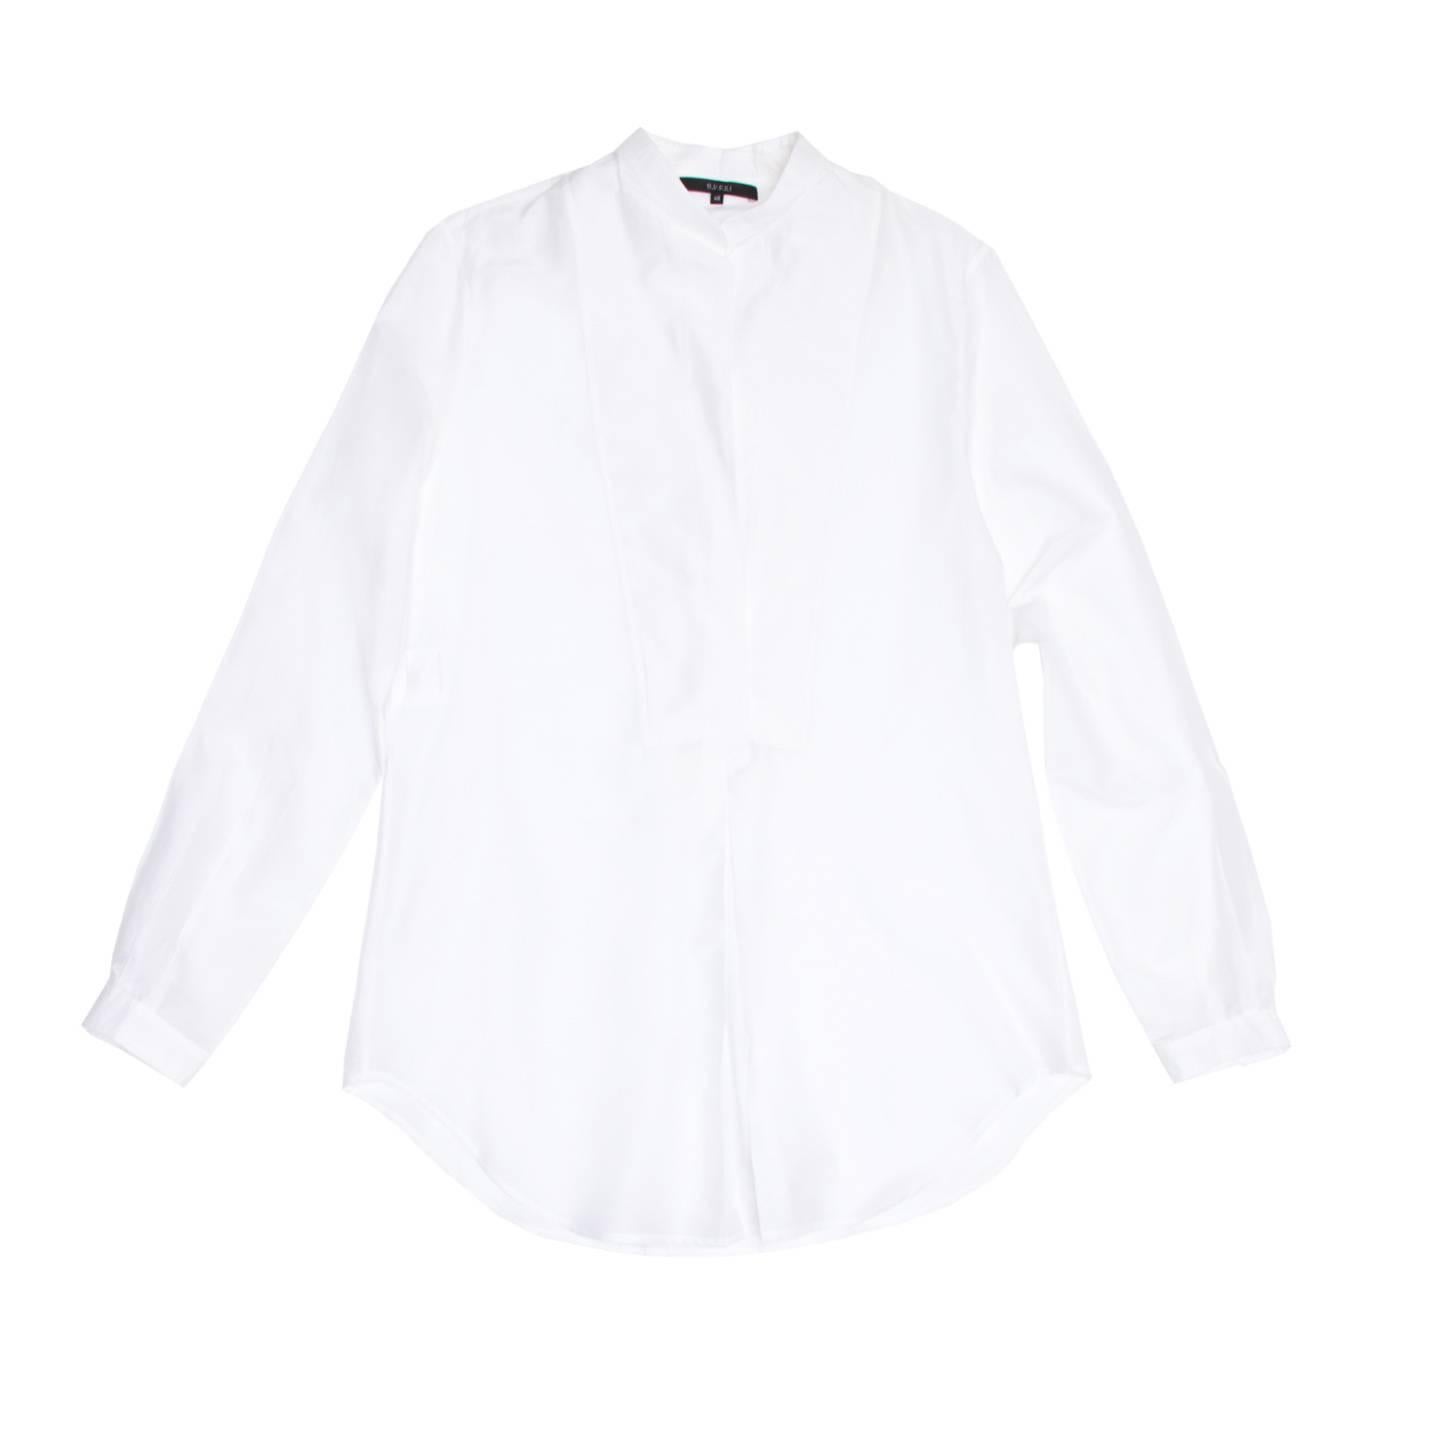 Beautiful light weight cotton and silk white shirt with Nehru collar. The fit is straight while an inverted pleat at center front and a box pleat at center back create movement and a little volume.The bib detail at front is composed of two identical